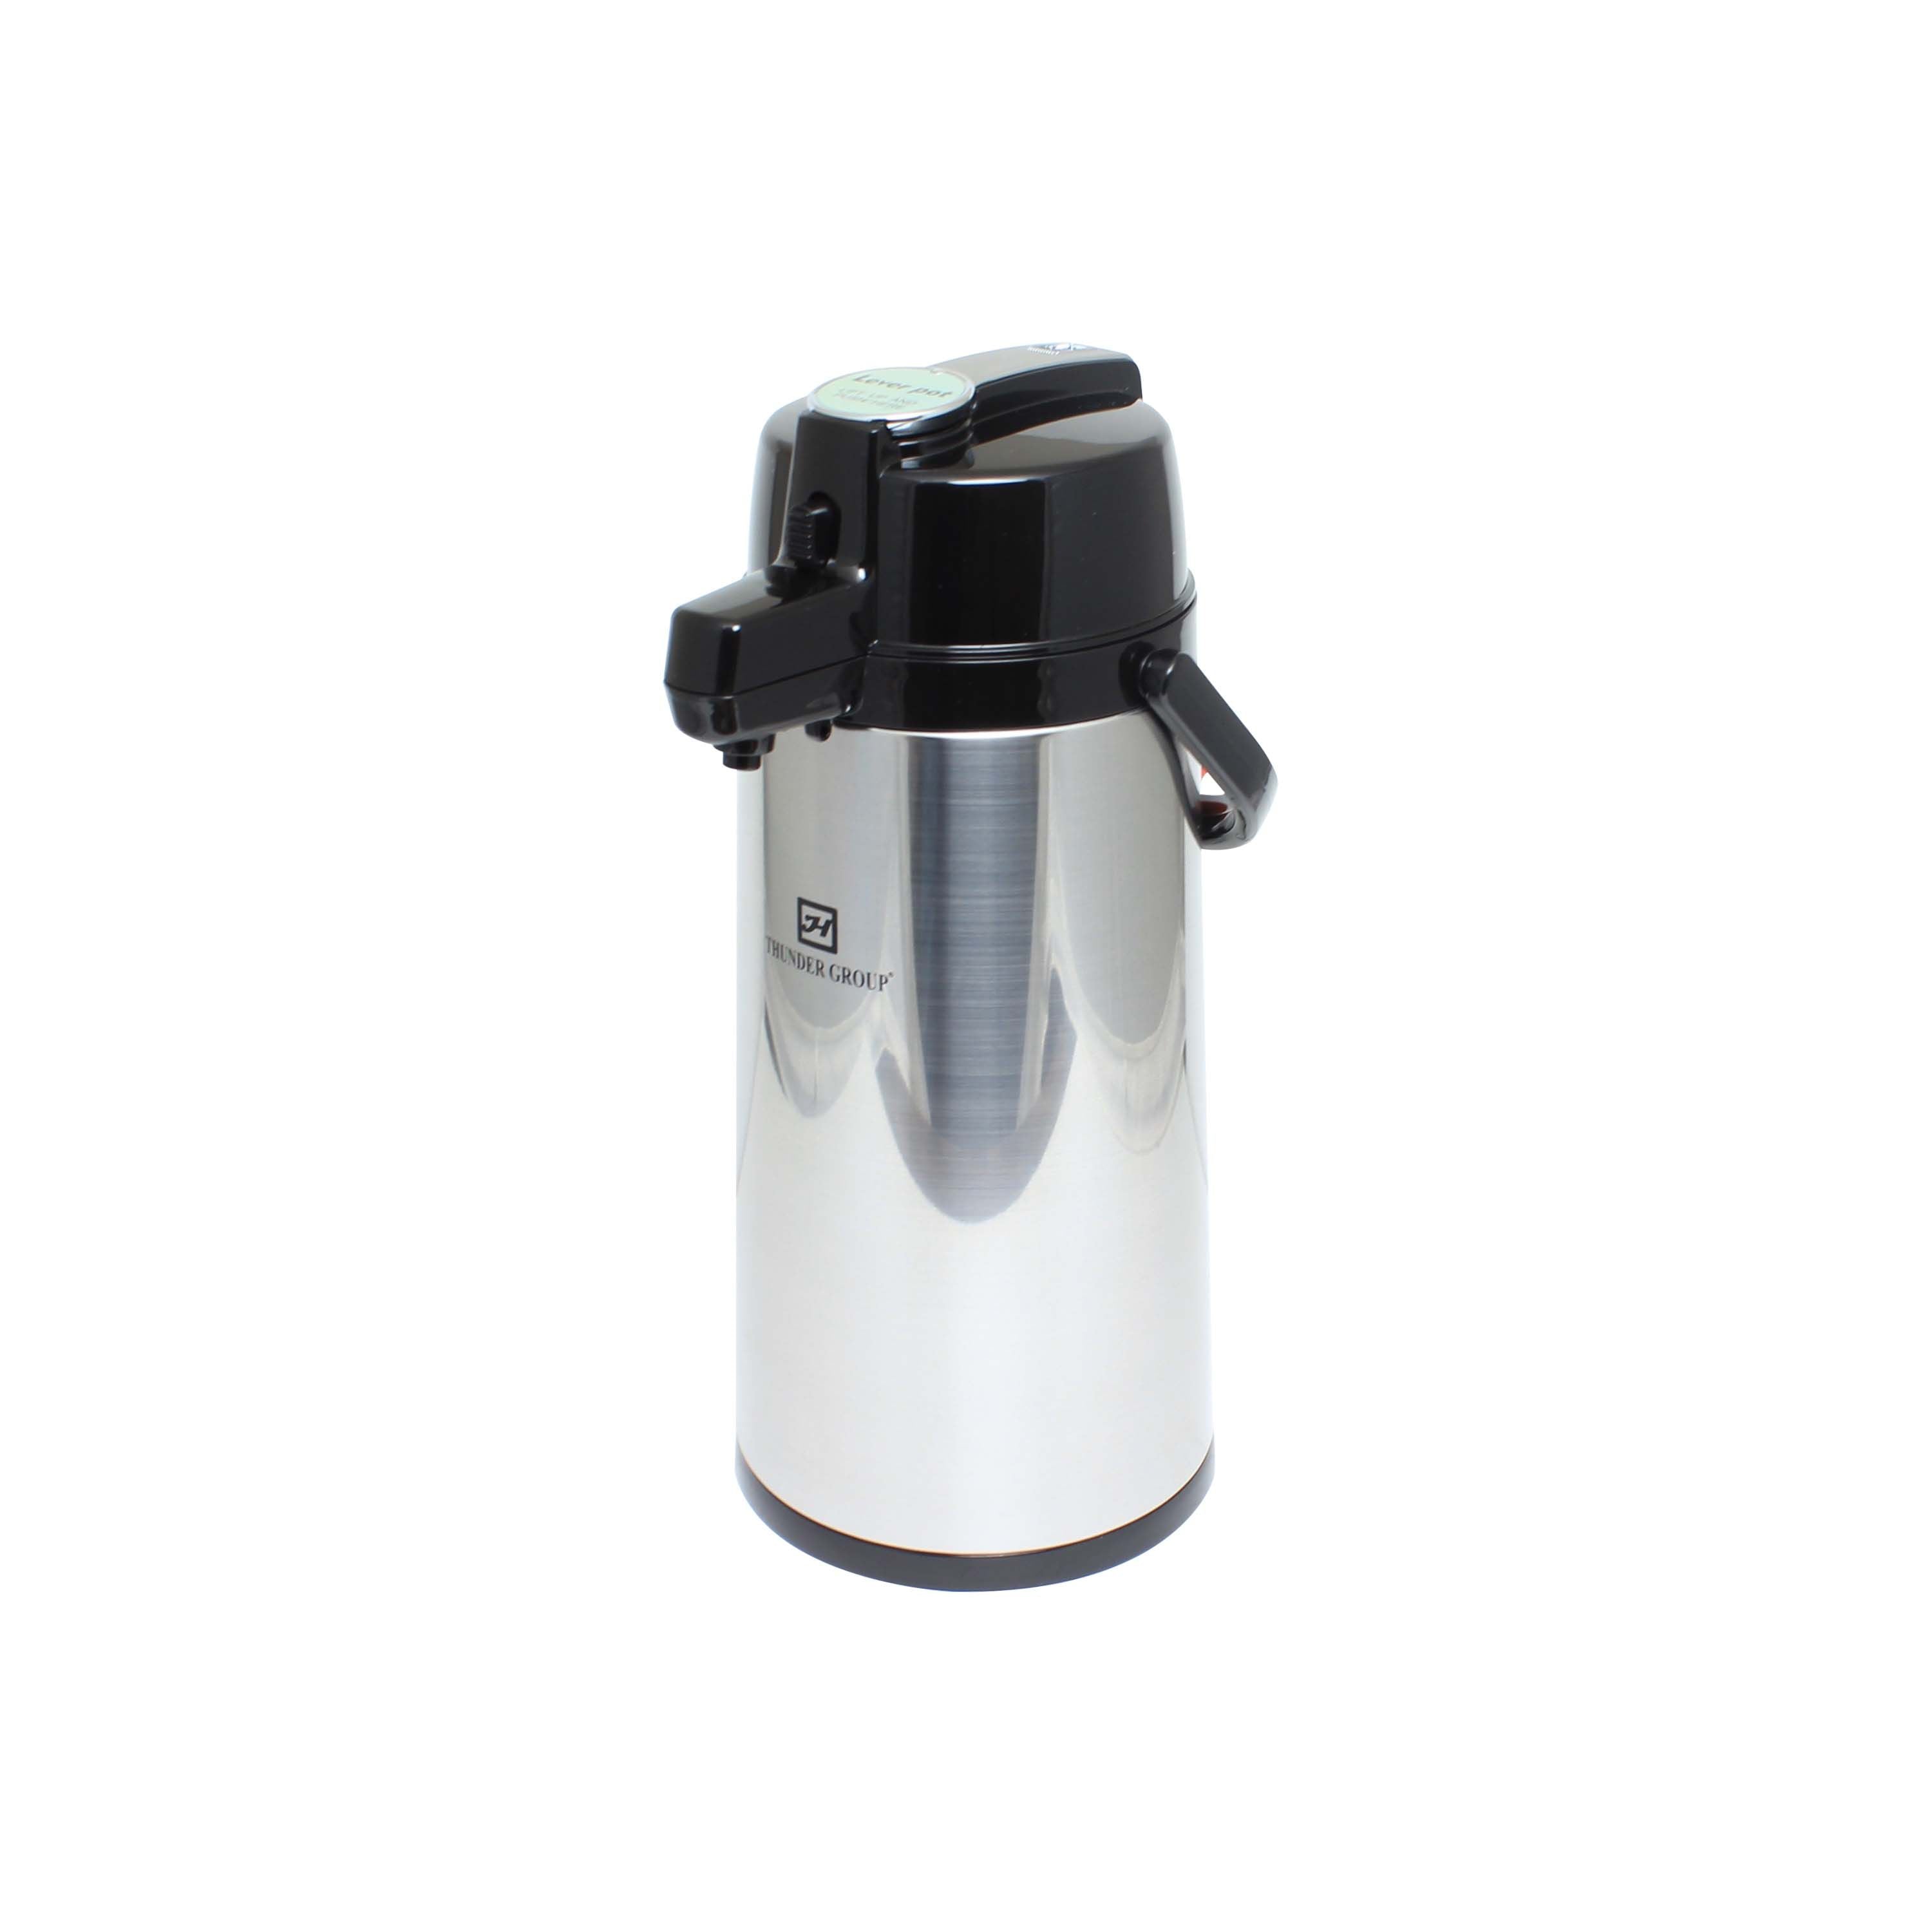 Thunder Group ASLS325 2.5 Liter / 84 oz. Airpot, Stainless Steel Lined, Lever Top